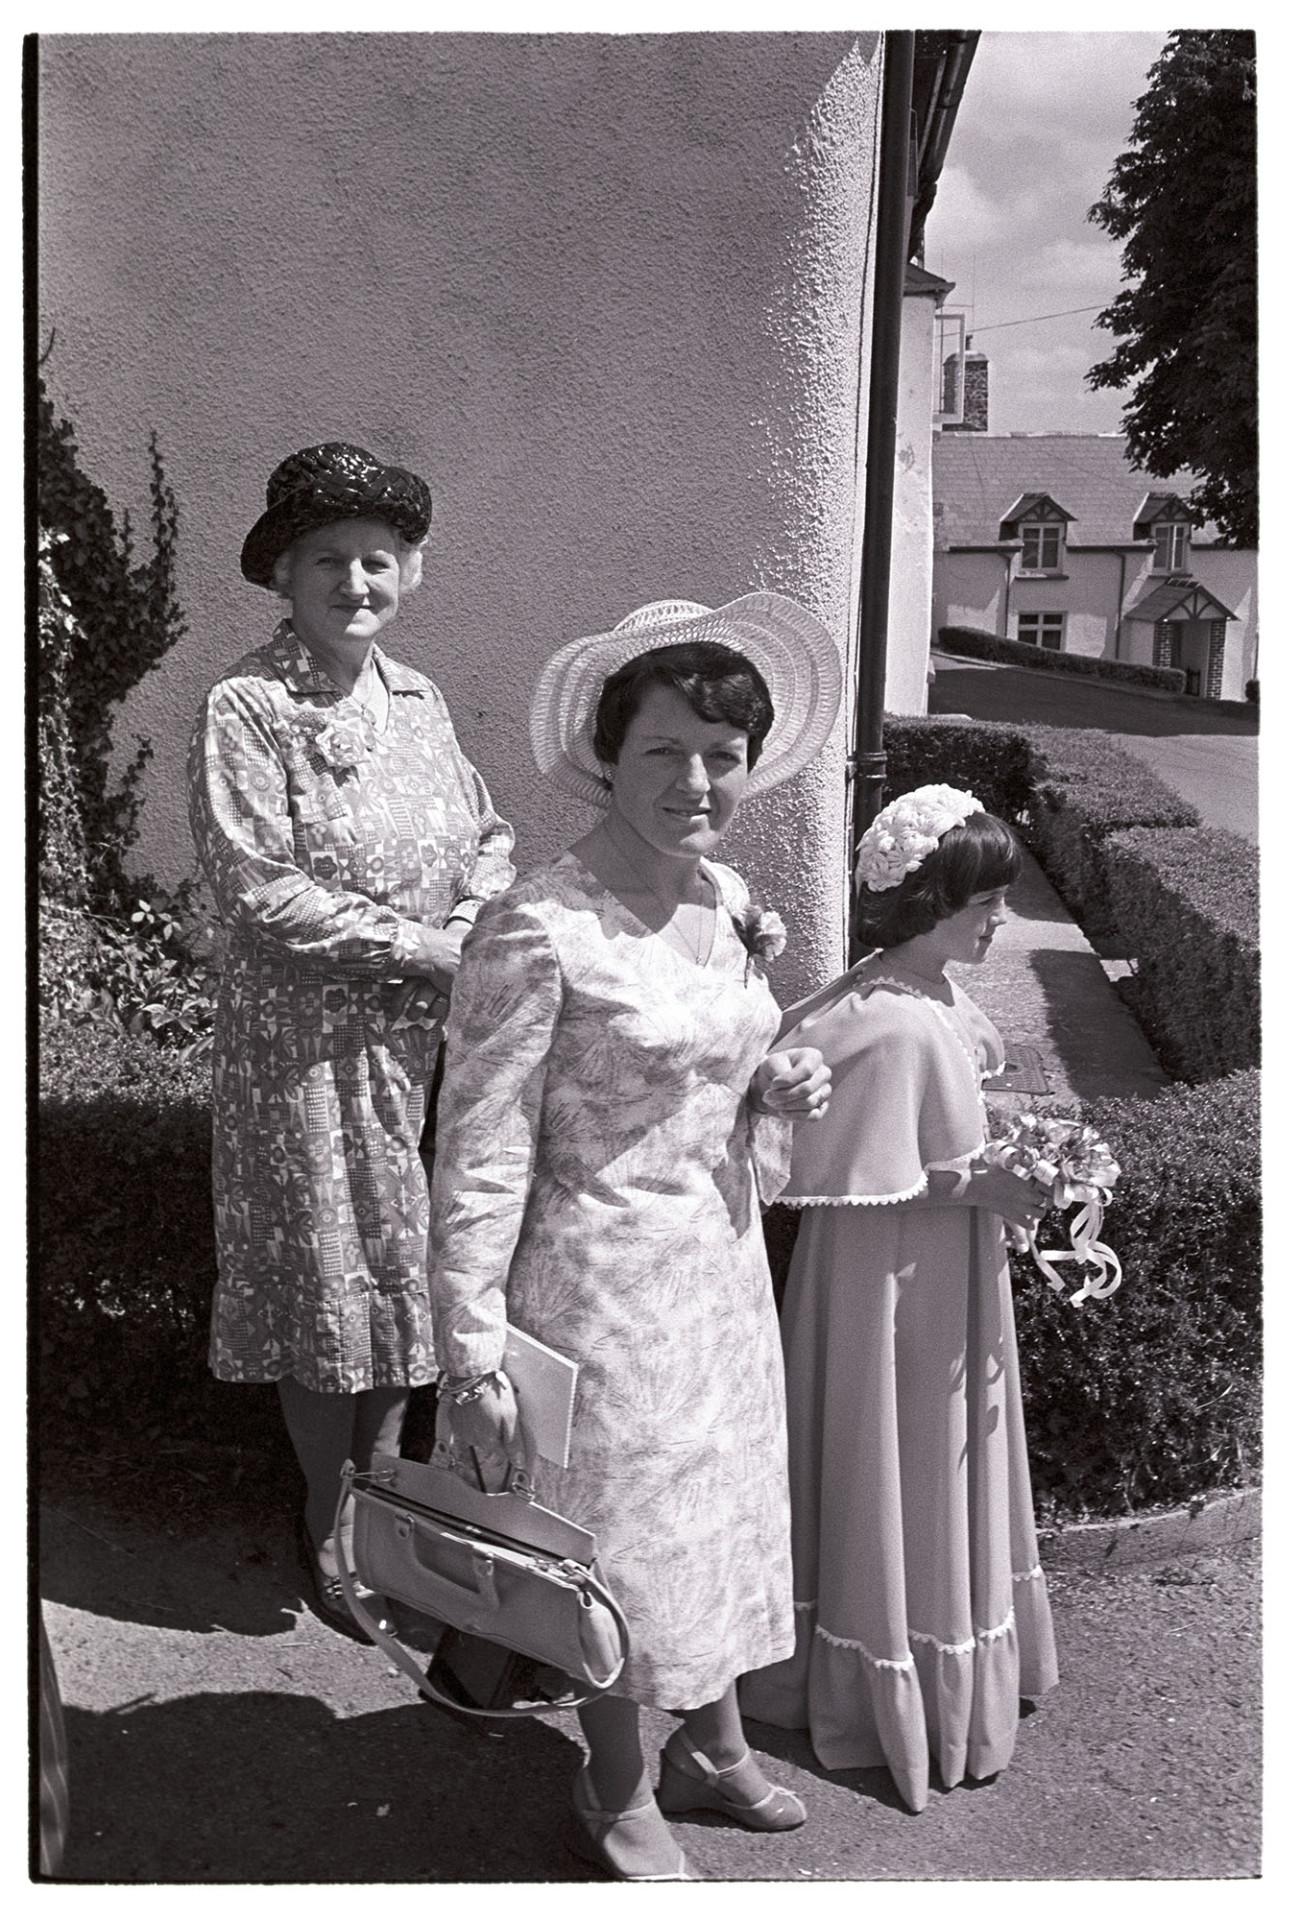 Women guests after wedding in best dresses.
[Three wedding guests stood beside a house in Atherington. Two women are wearing dresses and hats, and a girl, possibly a bridesmaid, is carrying a small bouquet with ribbons.]